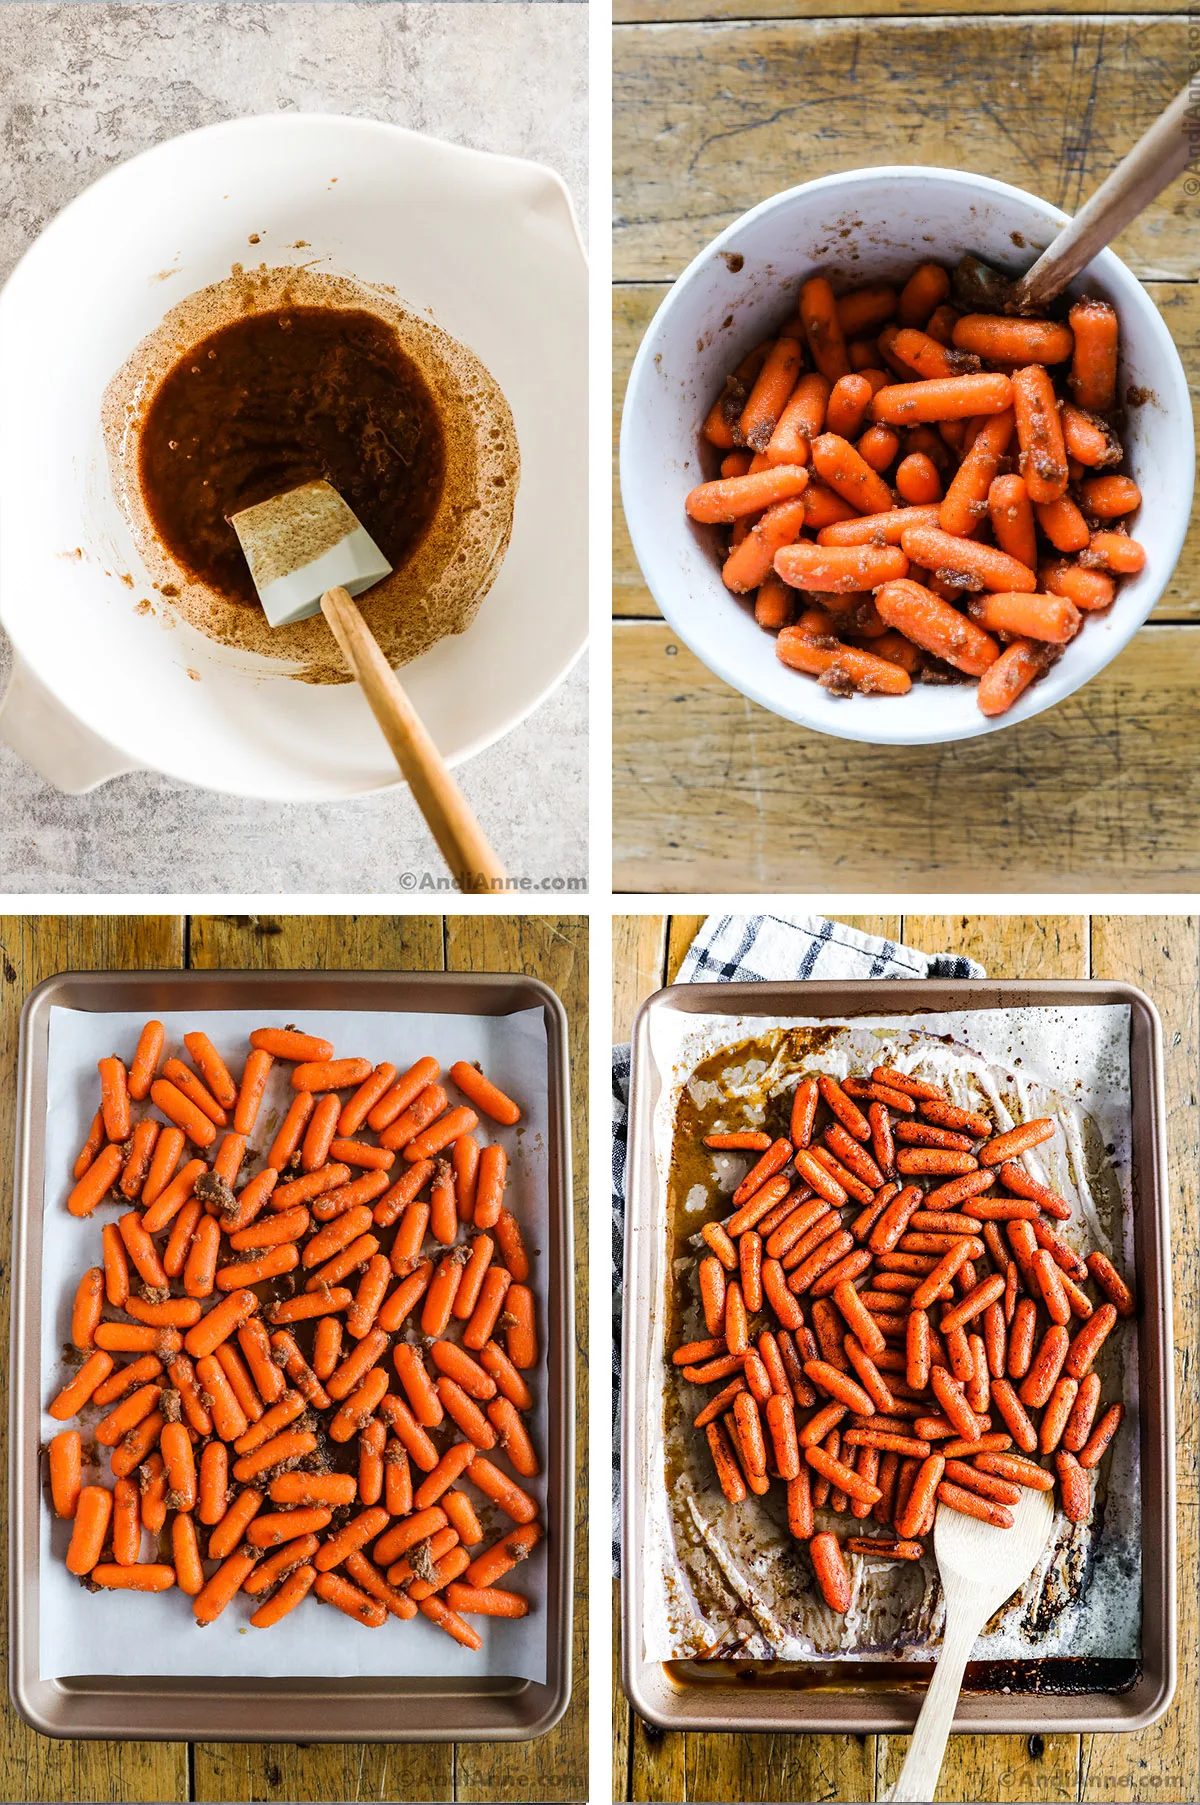 Four images showing various steps to make baked carrots. First is bowl of brown sugar sauce. Second is raw carrots tossed in brown sugar, last two are raw carrots tossed in brown sugar sauce on baking sheet. Last is baked brown sugar carrots on baking sheet.